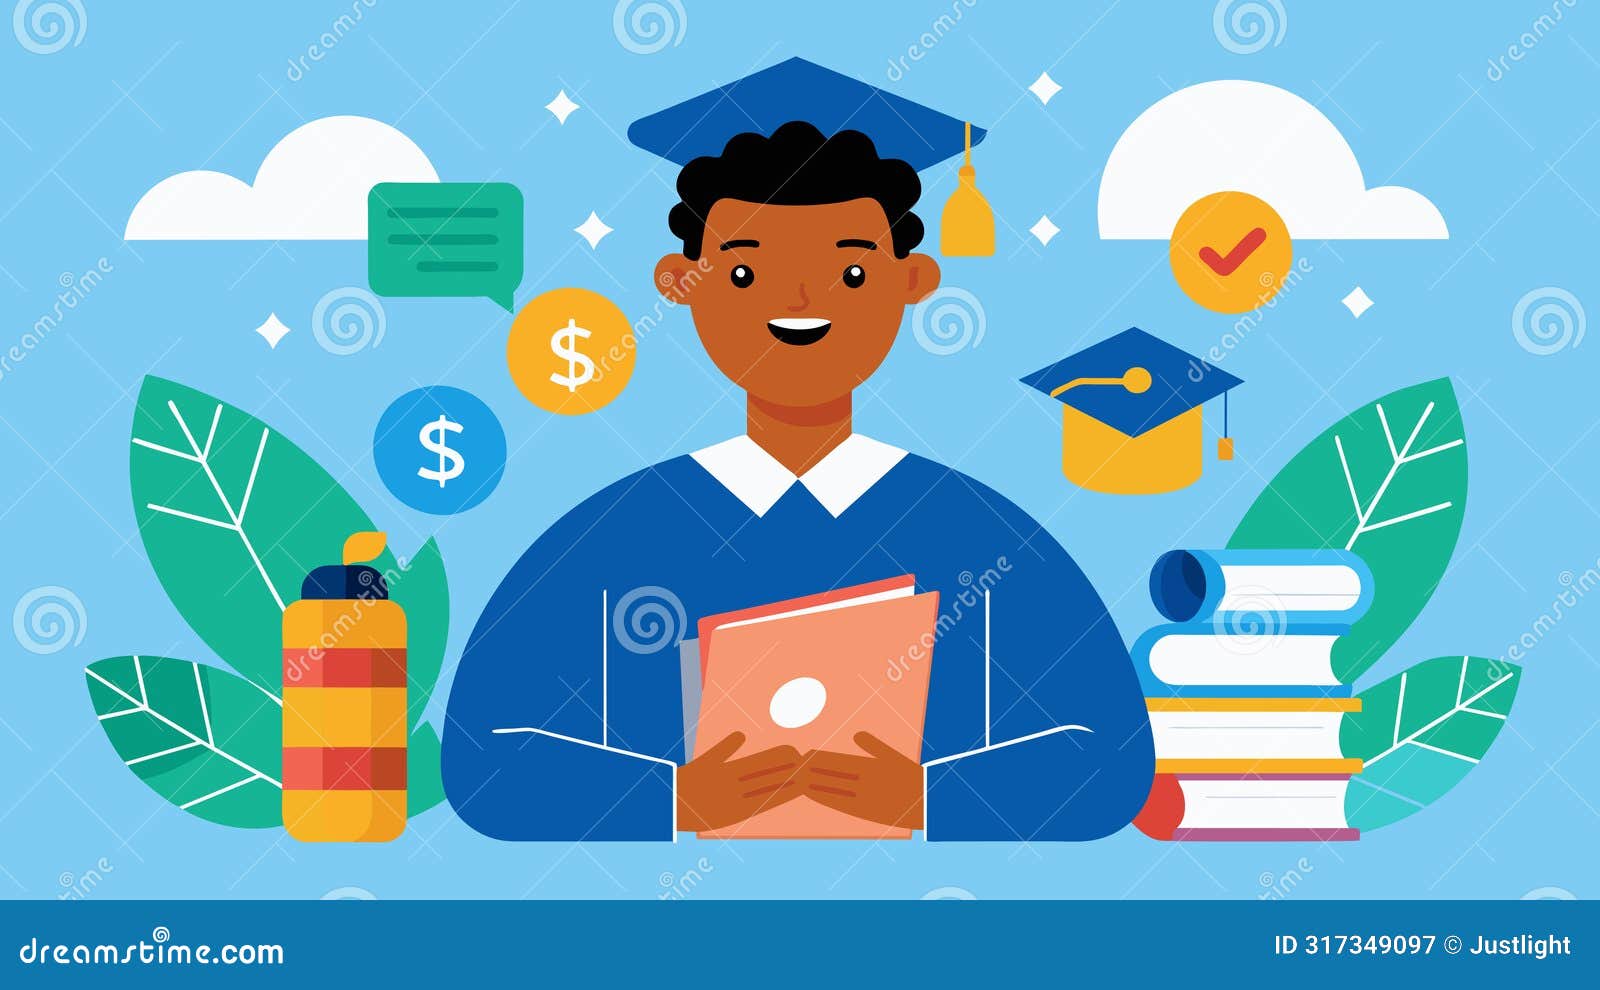 through strict budgeting and ting unnecessary expenses an individual shares how they paid off their student loans early